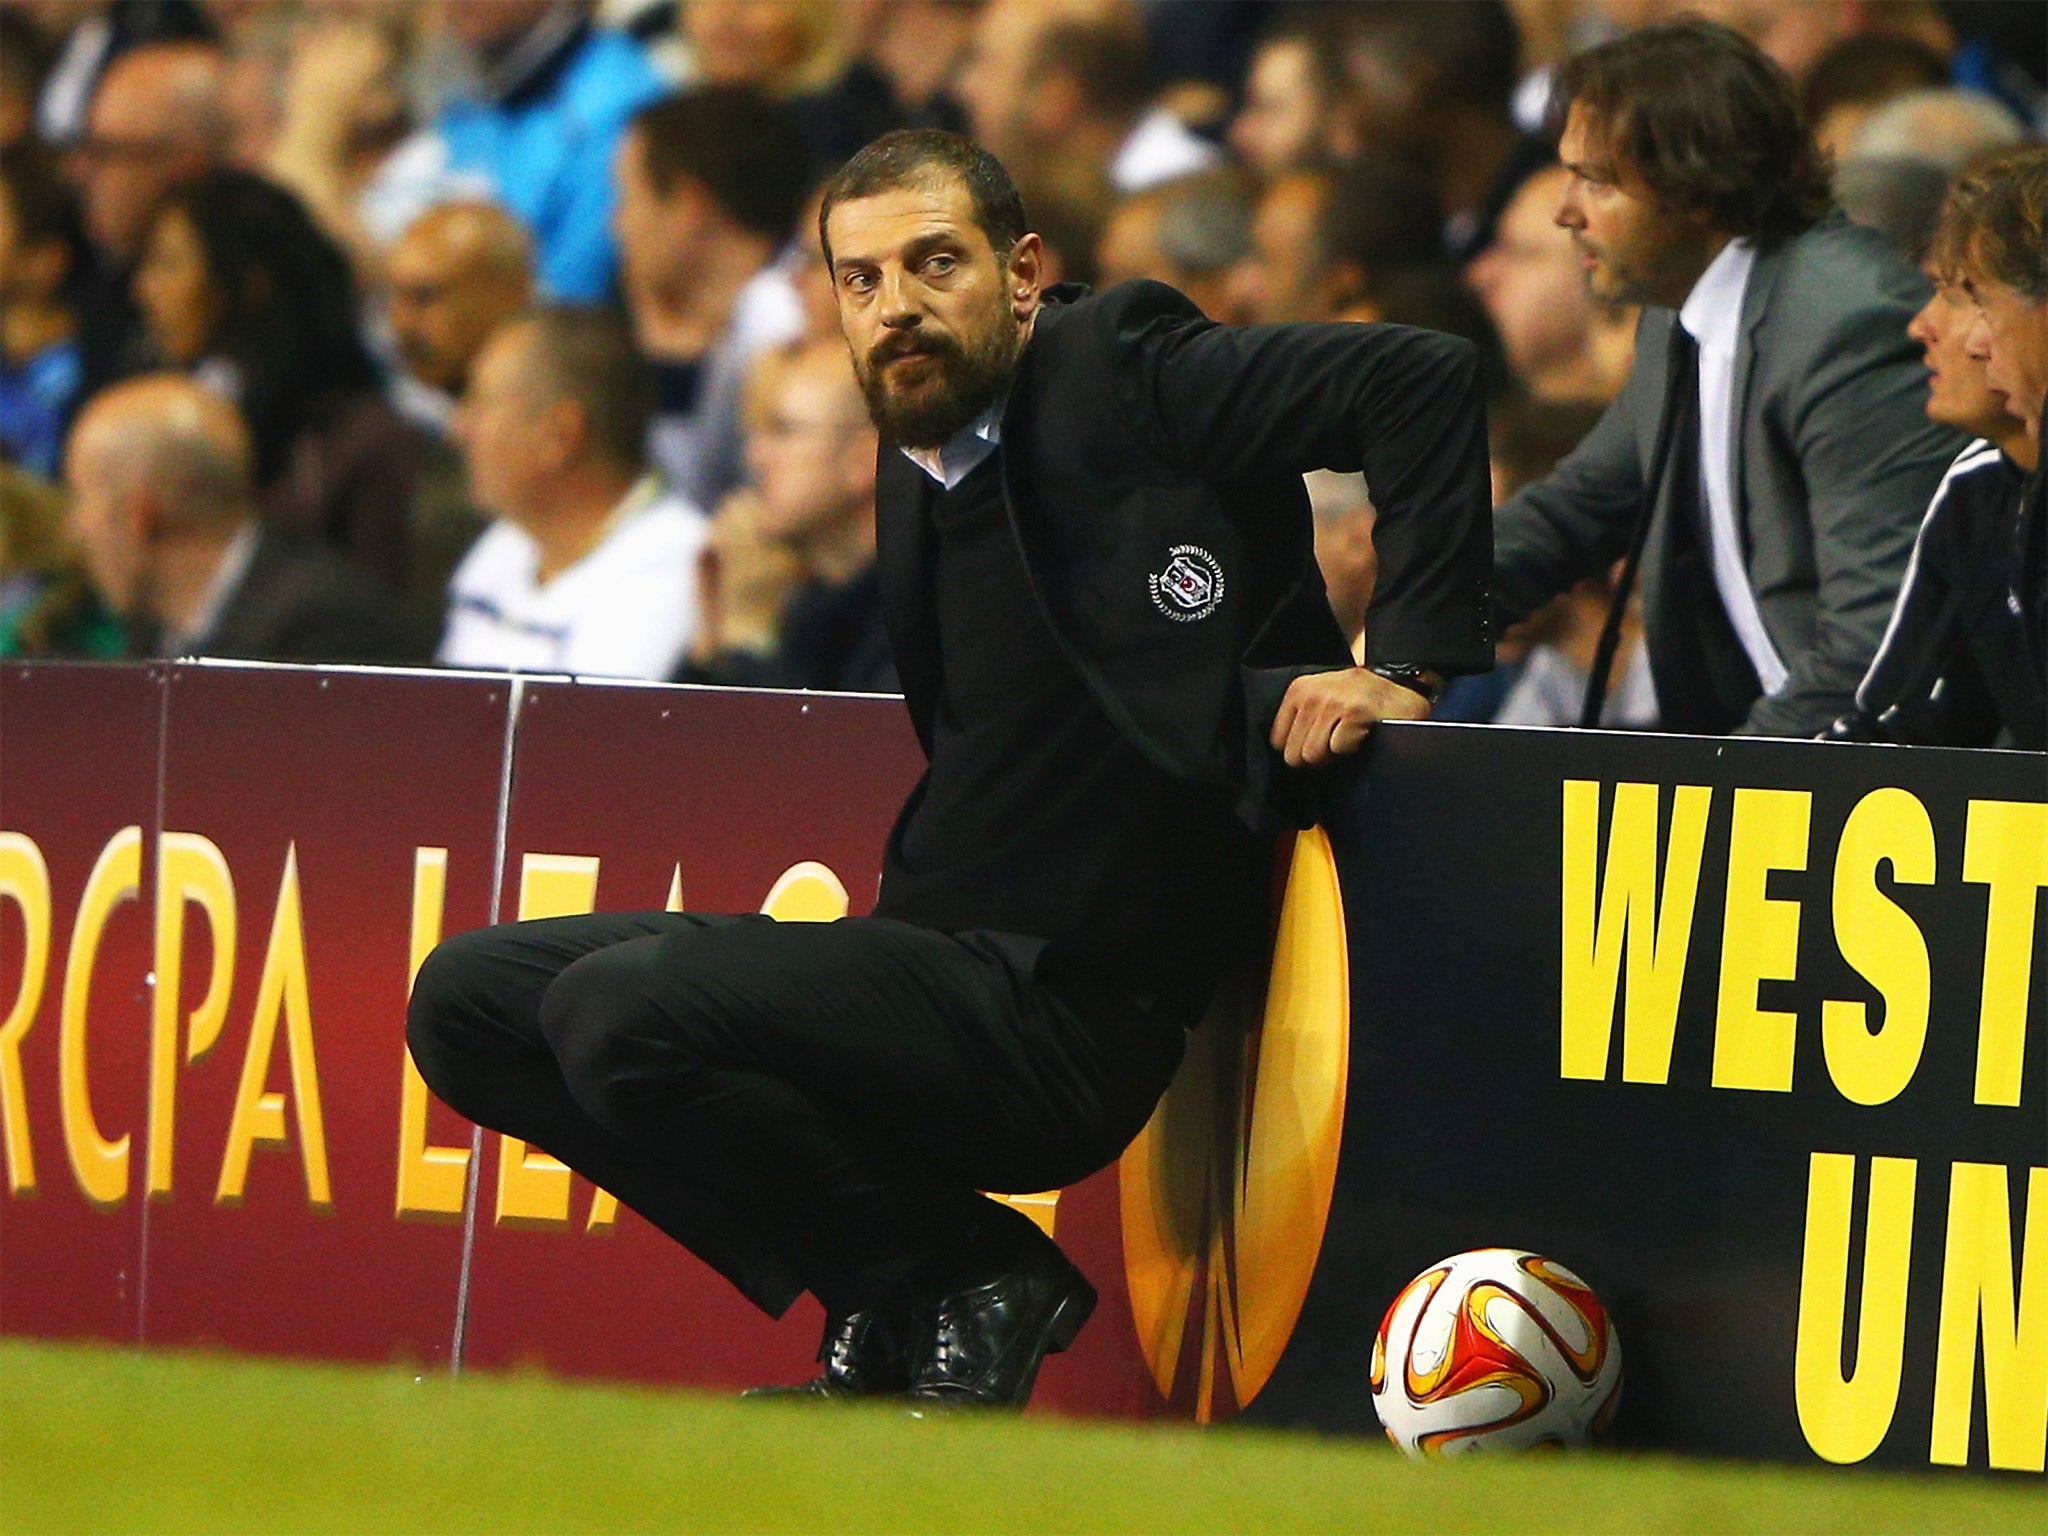 Slaven Bilic, the Besiktas coach, would love to manage in the Premier League one day